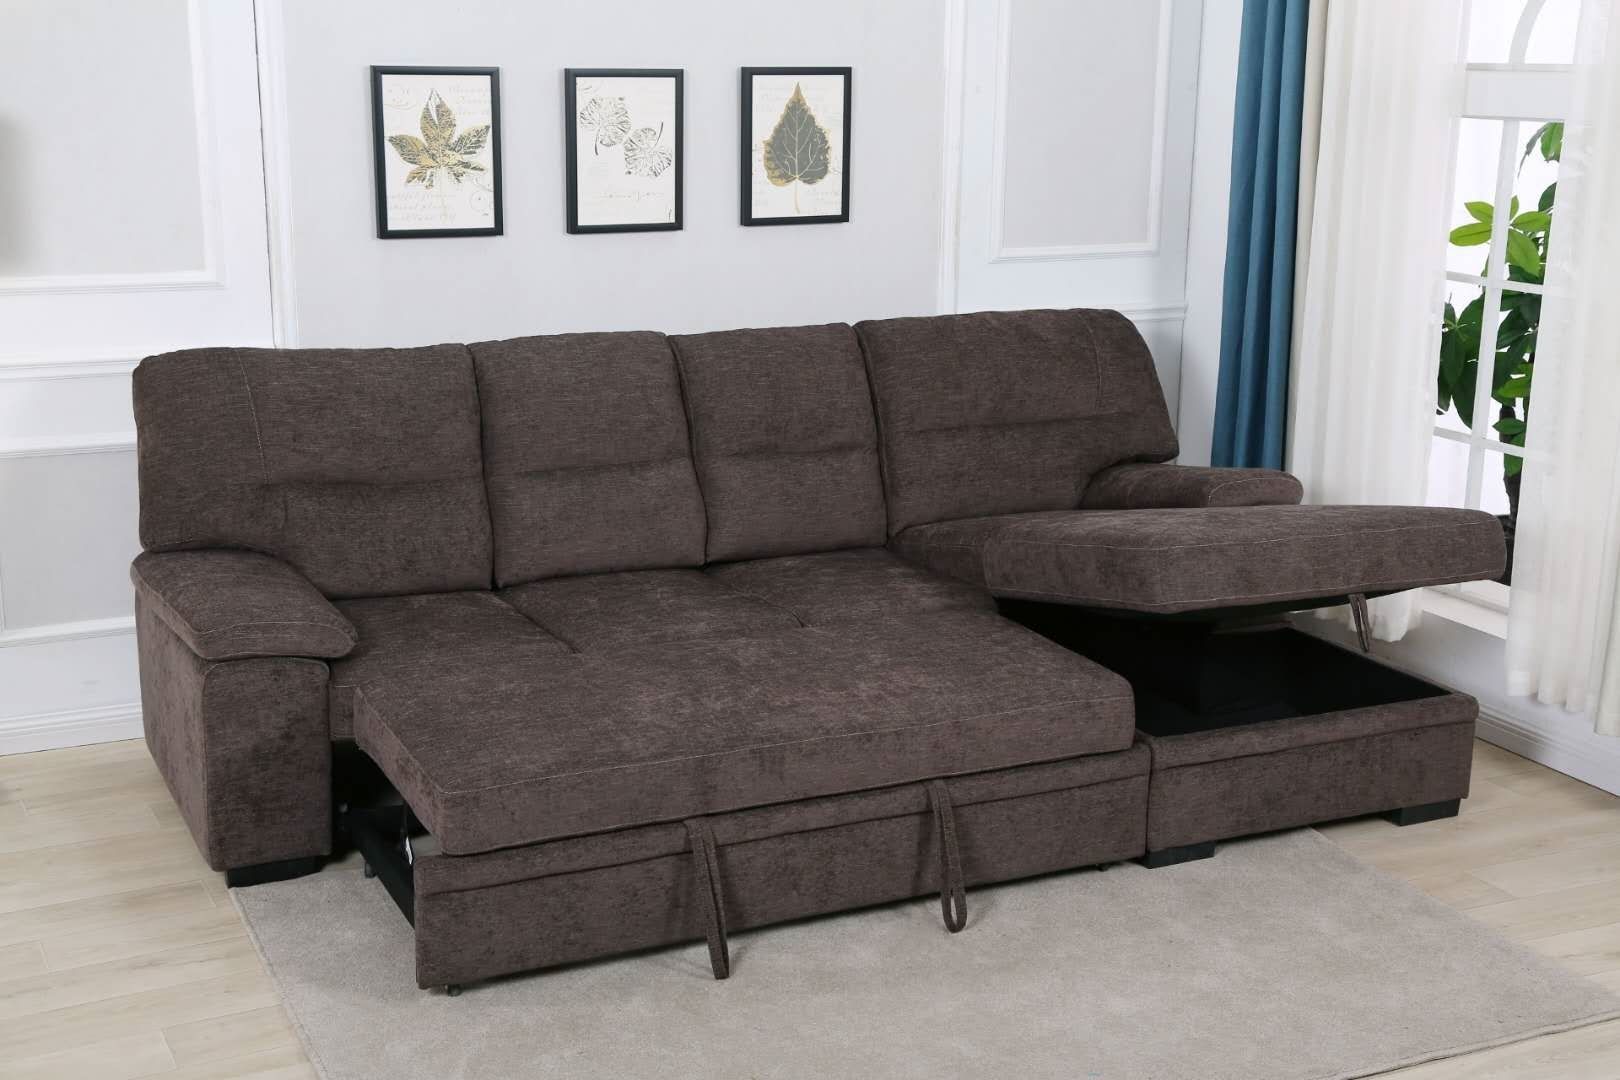 Silvio Sectional Sofa/ Sofa Bed With Storage Ifurniture Intended For Live It Cozy Sectional Sofa Beds With Storage (View 5 of 15)